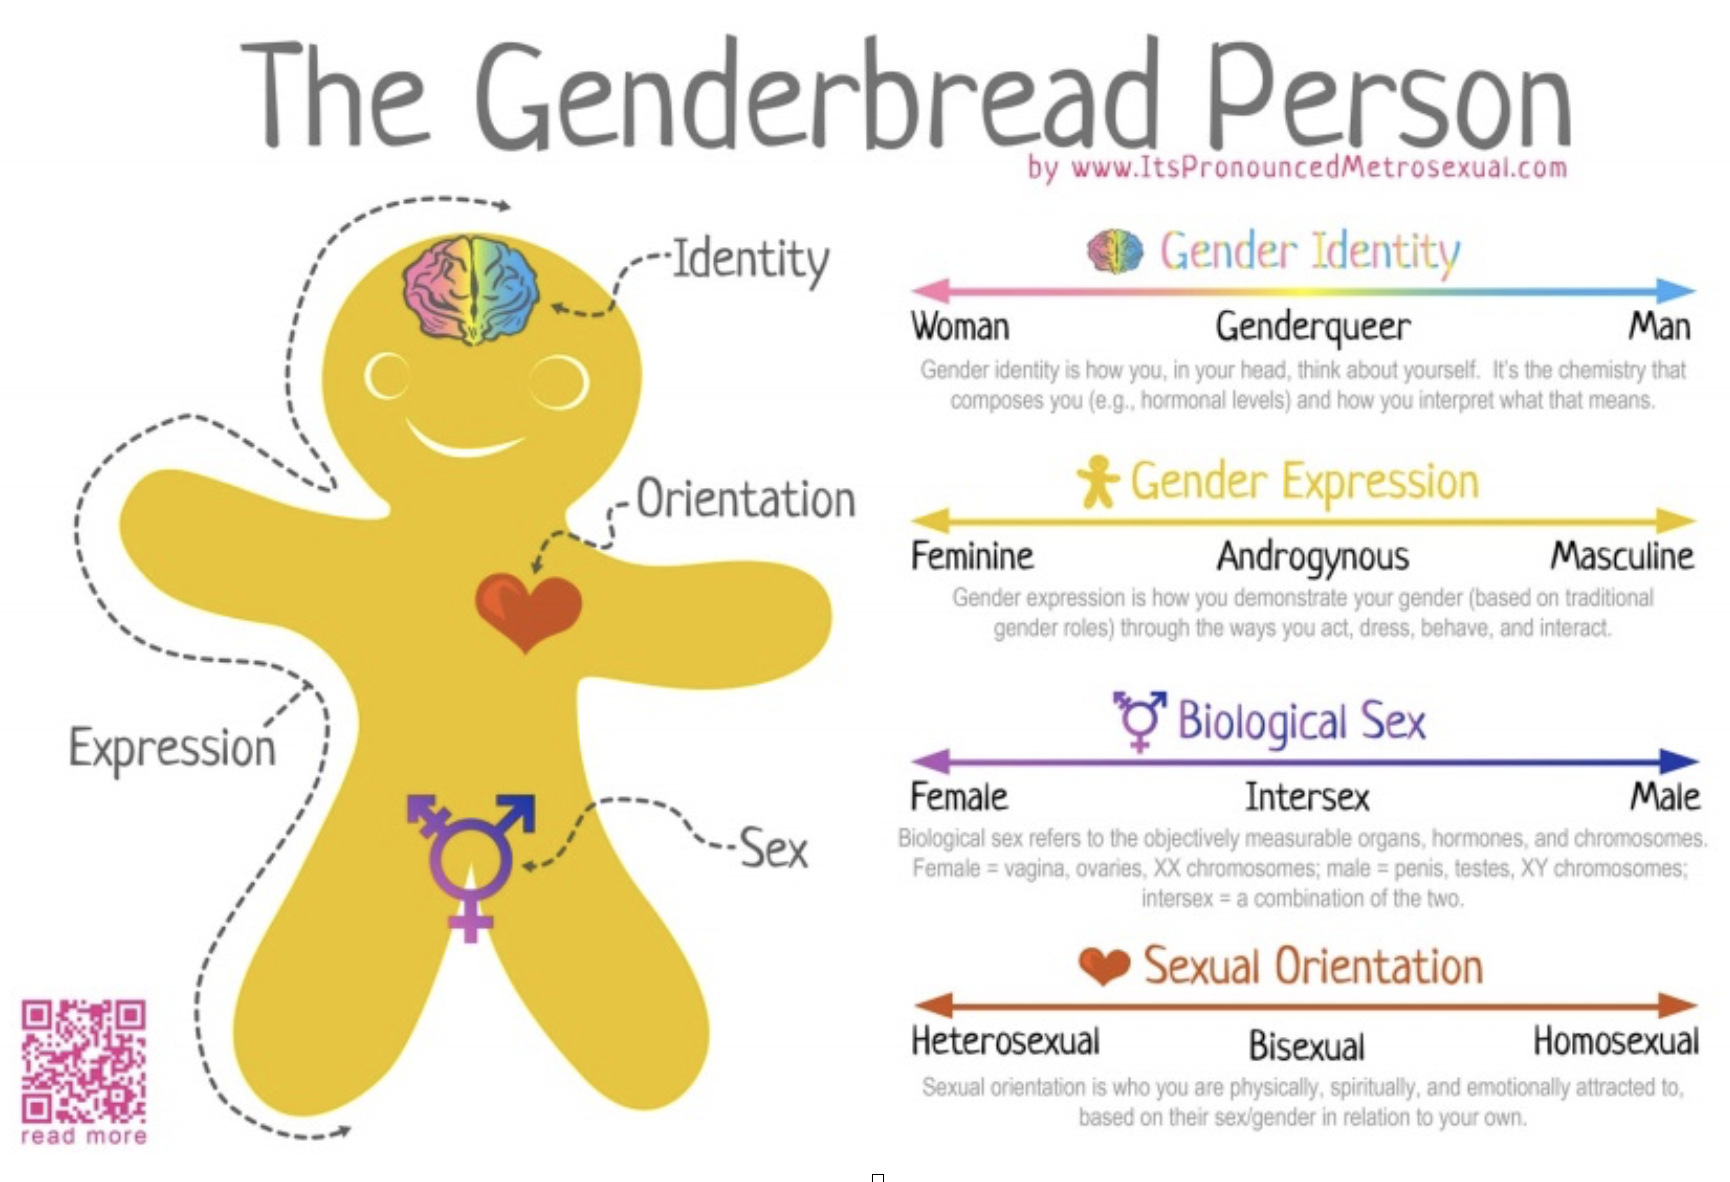 Gingerbread person with labelled parts of their body as their identity, sex, orientation and expression